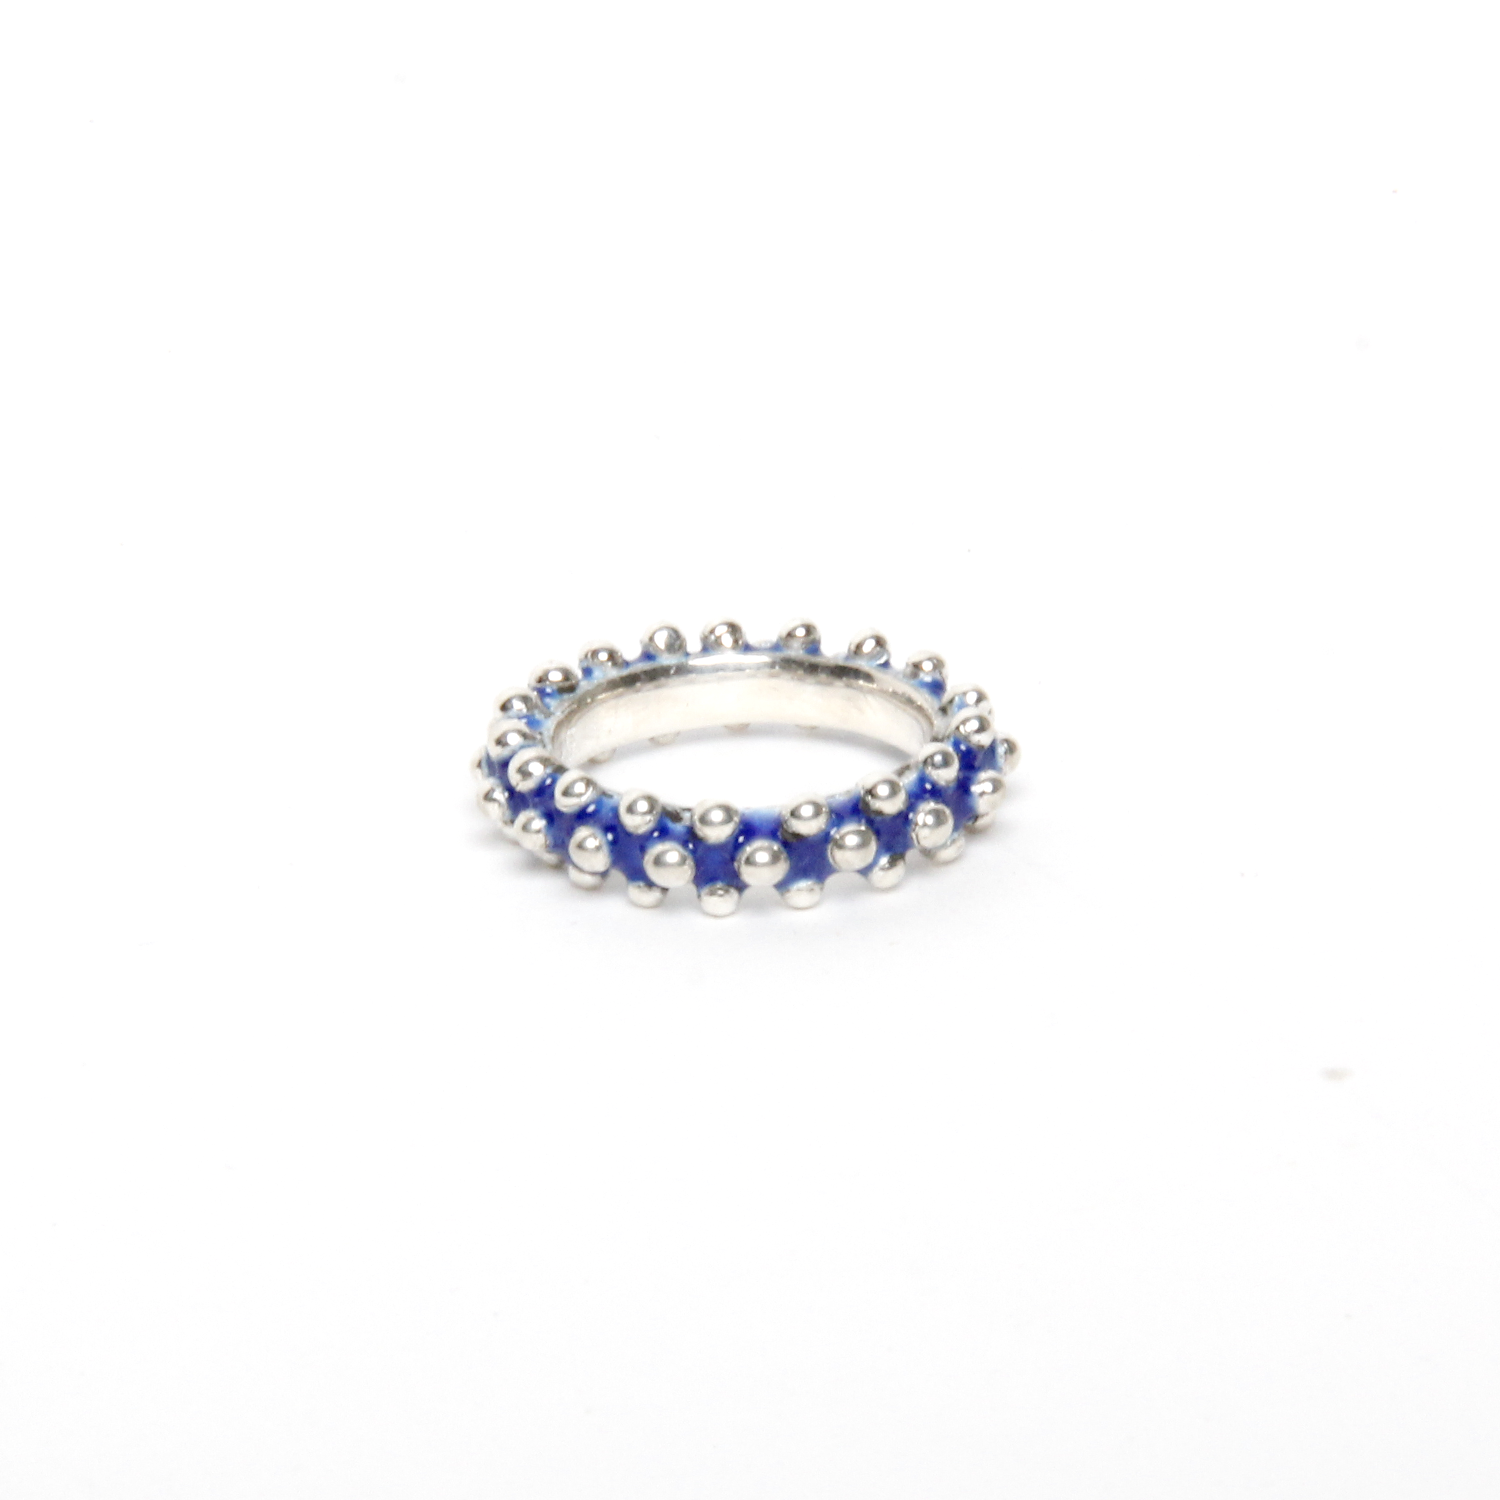 Cinelli Maillet: Blowfish Eternity Ring in Blue Product Image 3 of 3